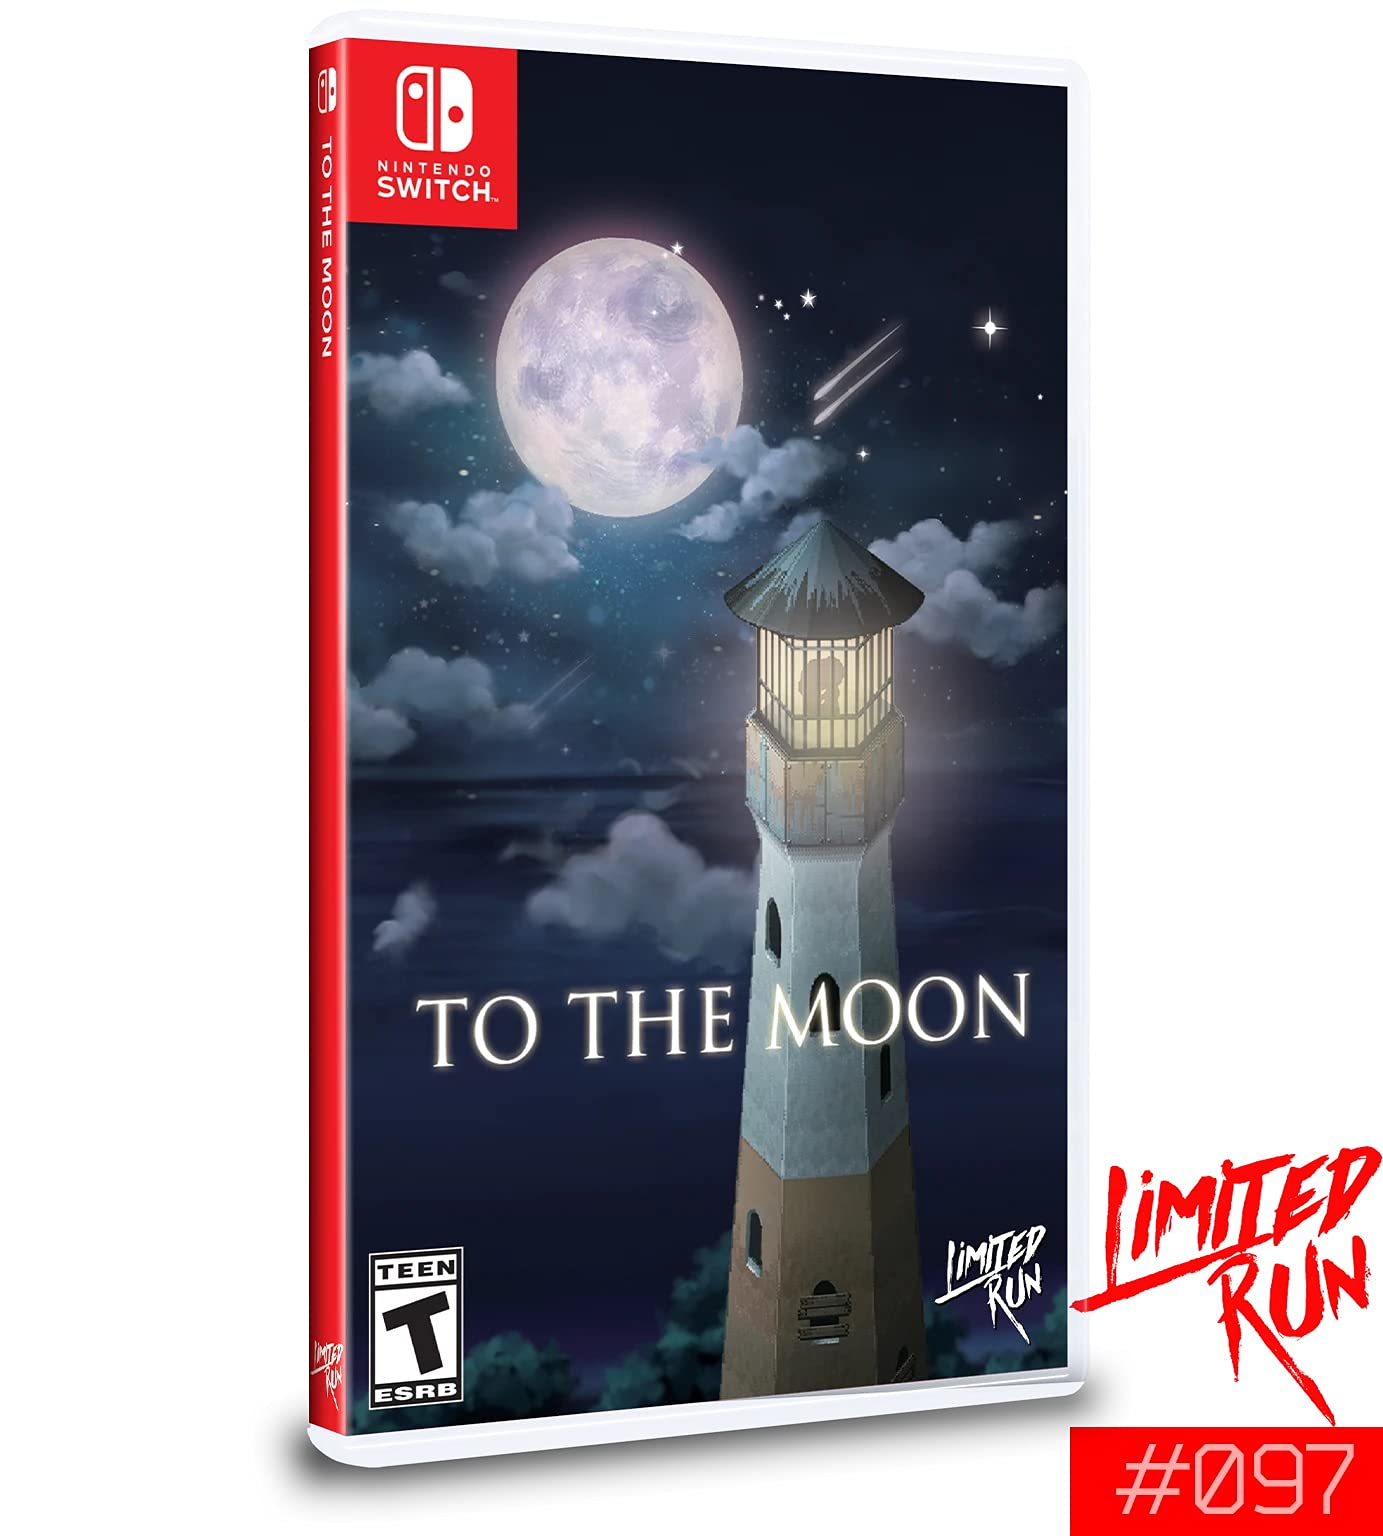 To The Moon (Limited Run)